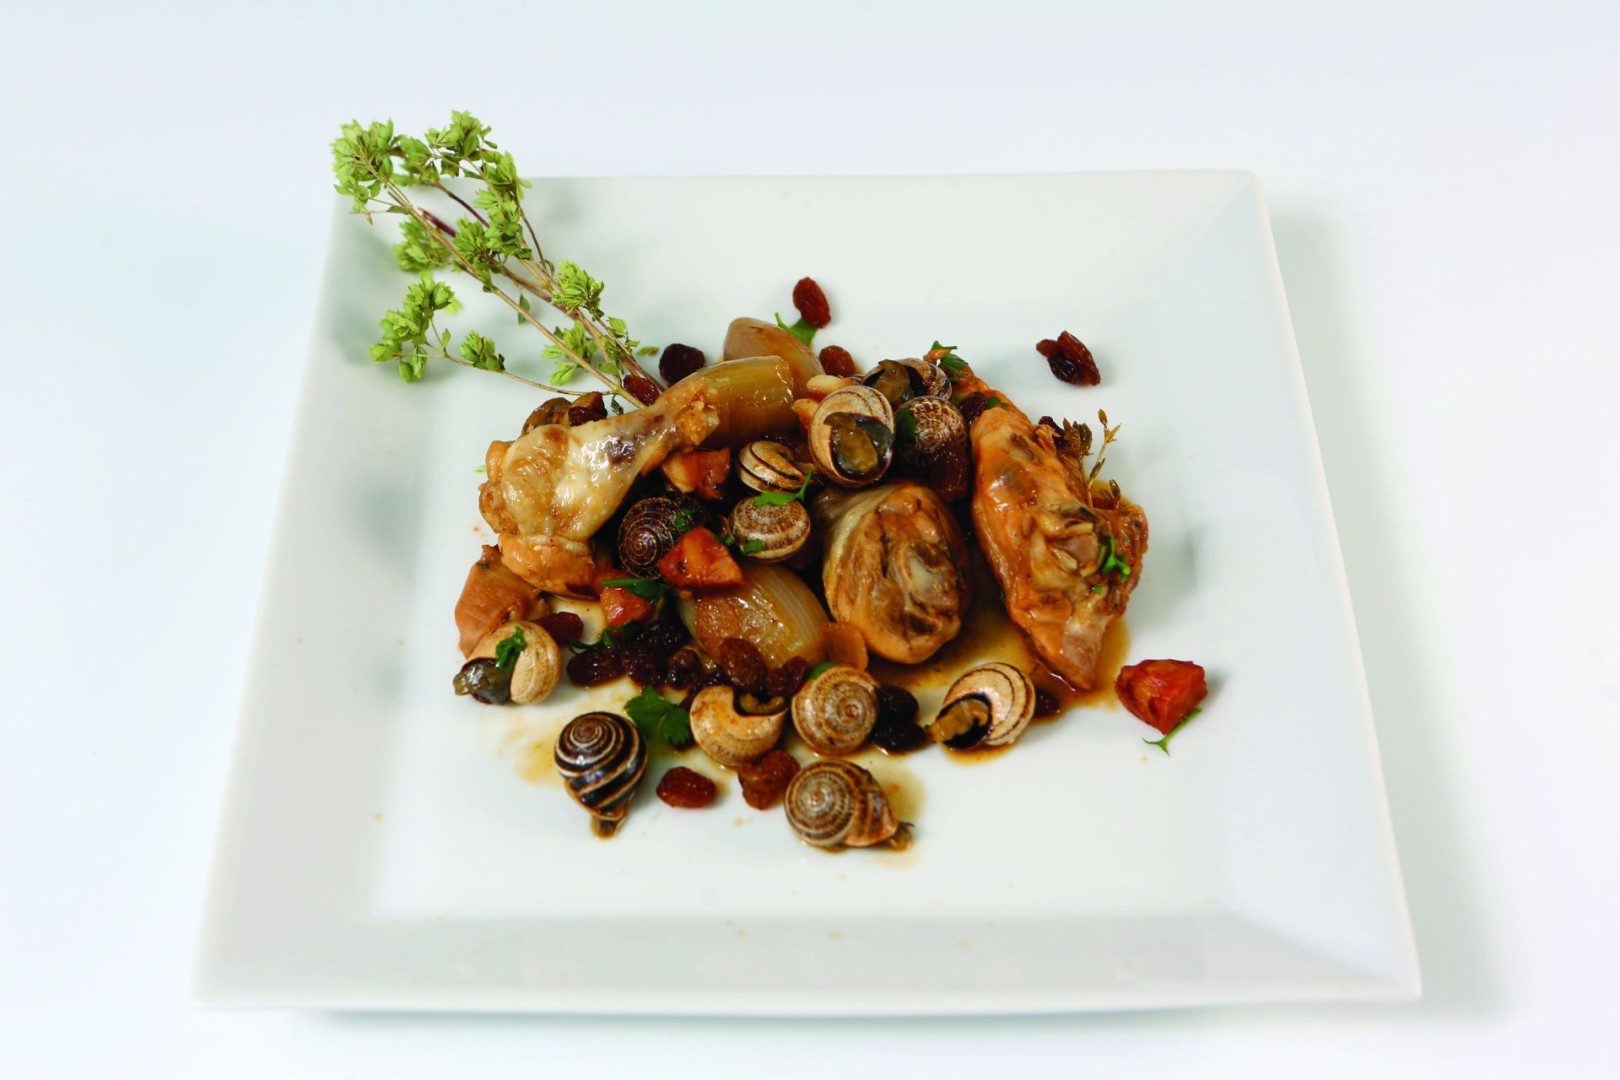 Chicken casserole with milk snail and nuts